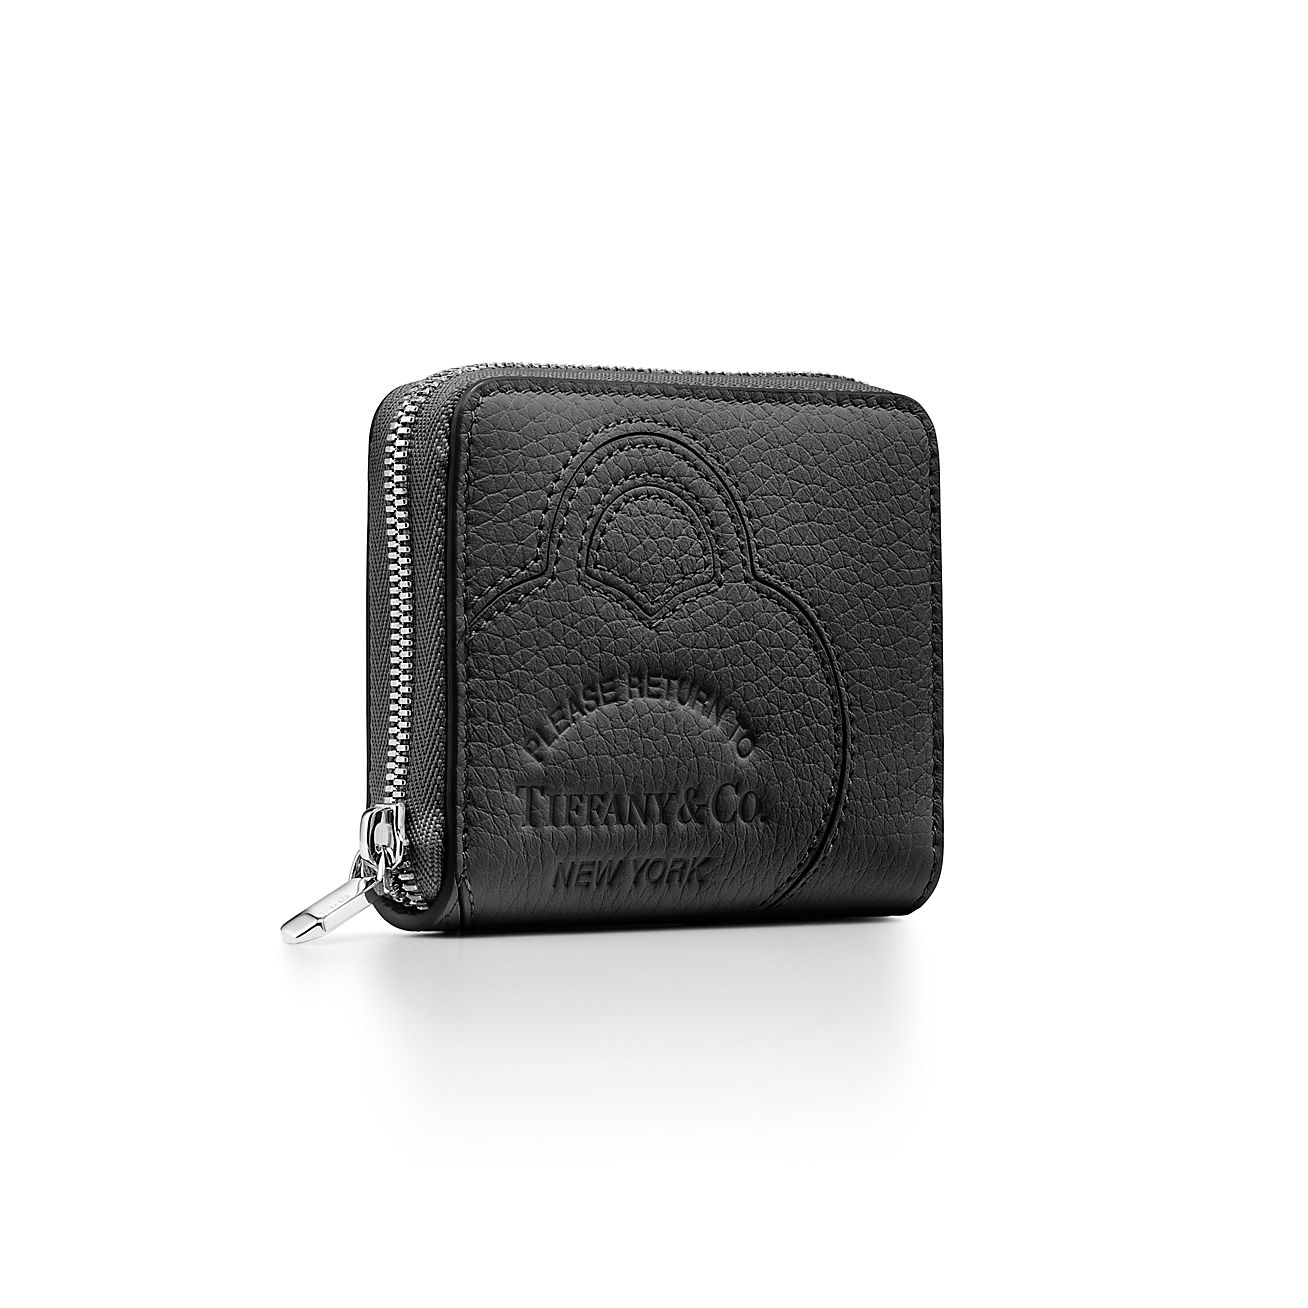 Return to Tiffany™ Small Zip Wallet in Black Leather | Tiffany & Co.